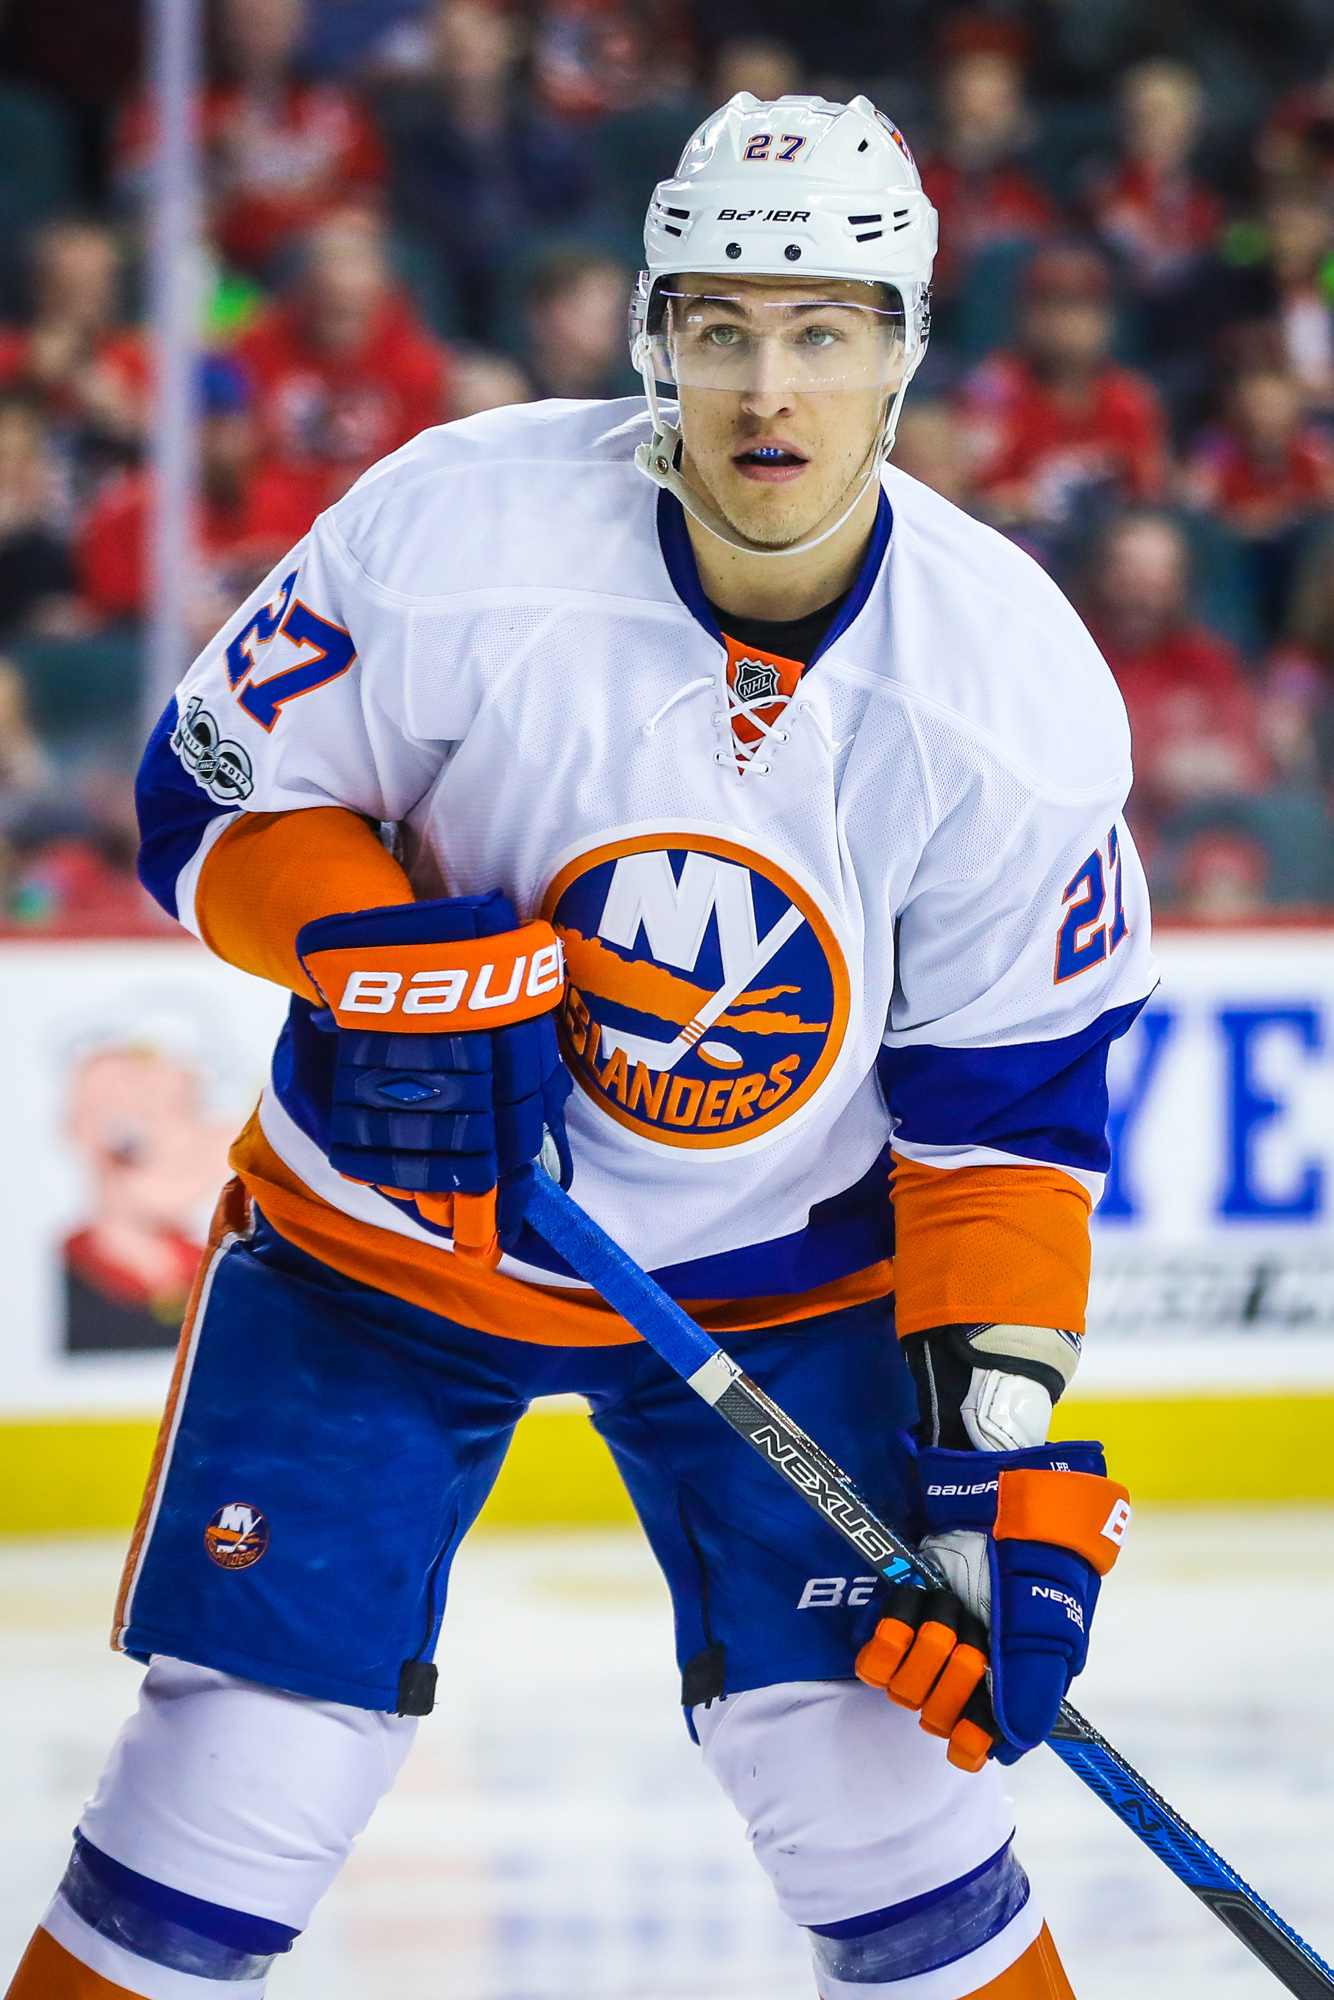 Captain Anders Lee is uniquely equipped for new Islanders task